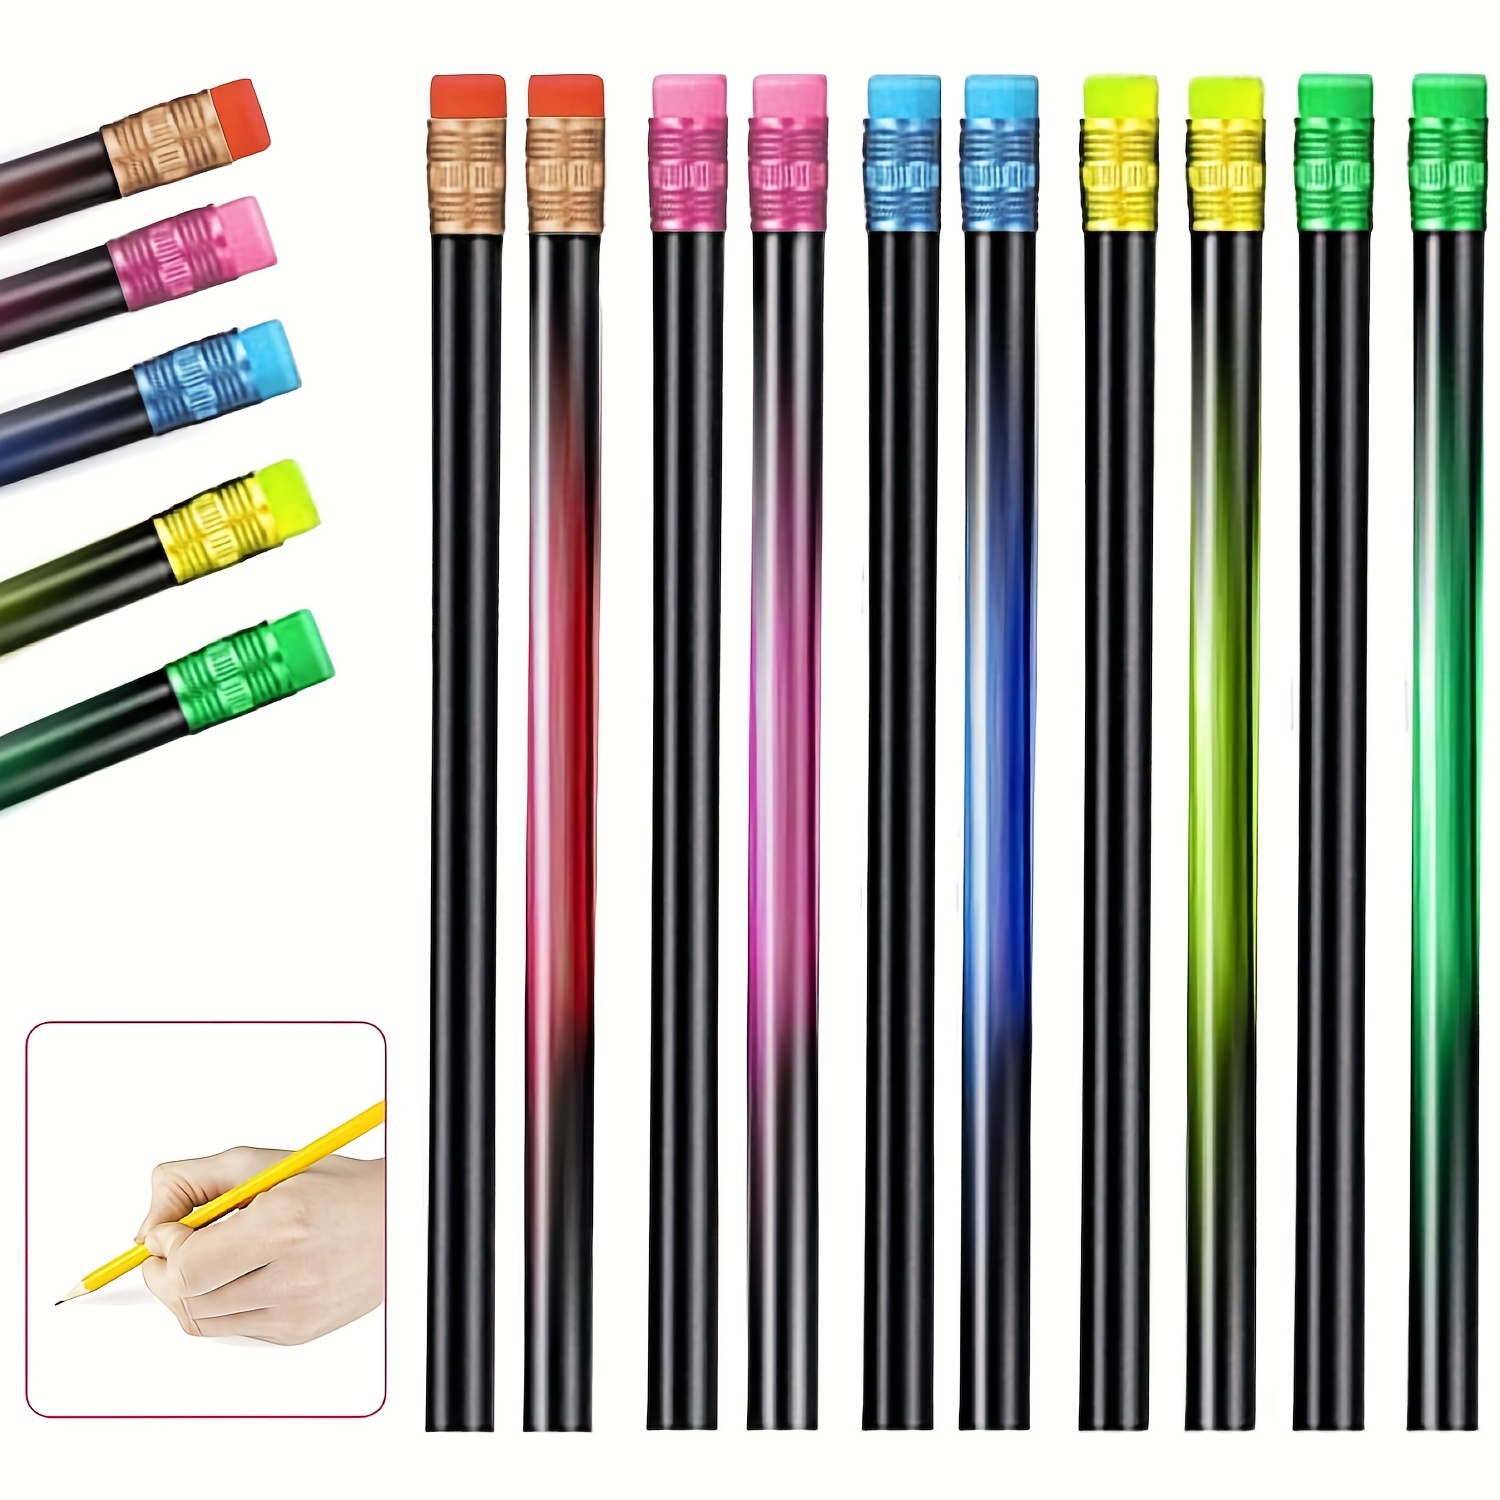  40 Pcs Color Changing Mood Pencil with Motivational Sayings  Inspirational Pencils 2b Changing Pencil Heat Assorted Thermochromic Pencils  with Eraser for Student (Motivational Style, Classic Color,) : Office  Products